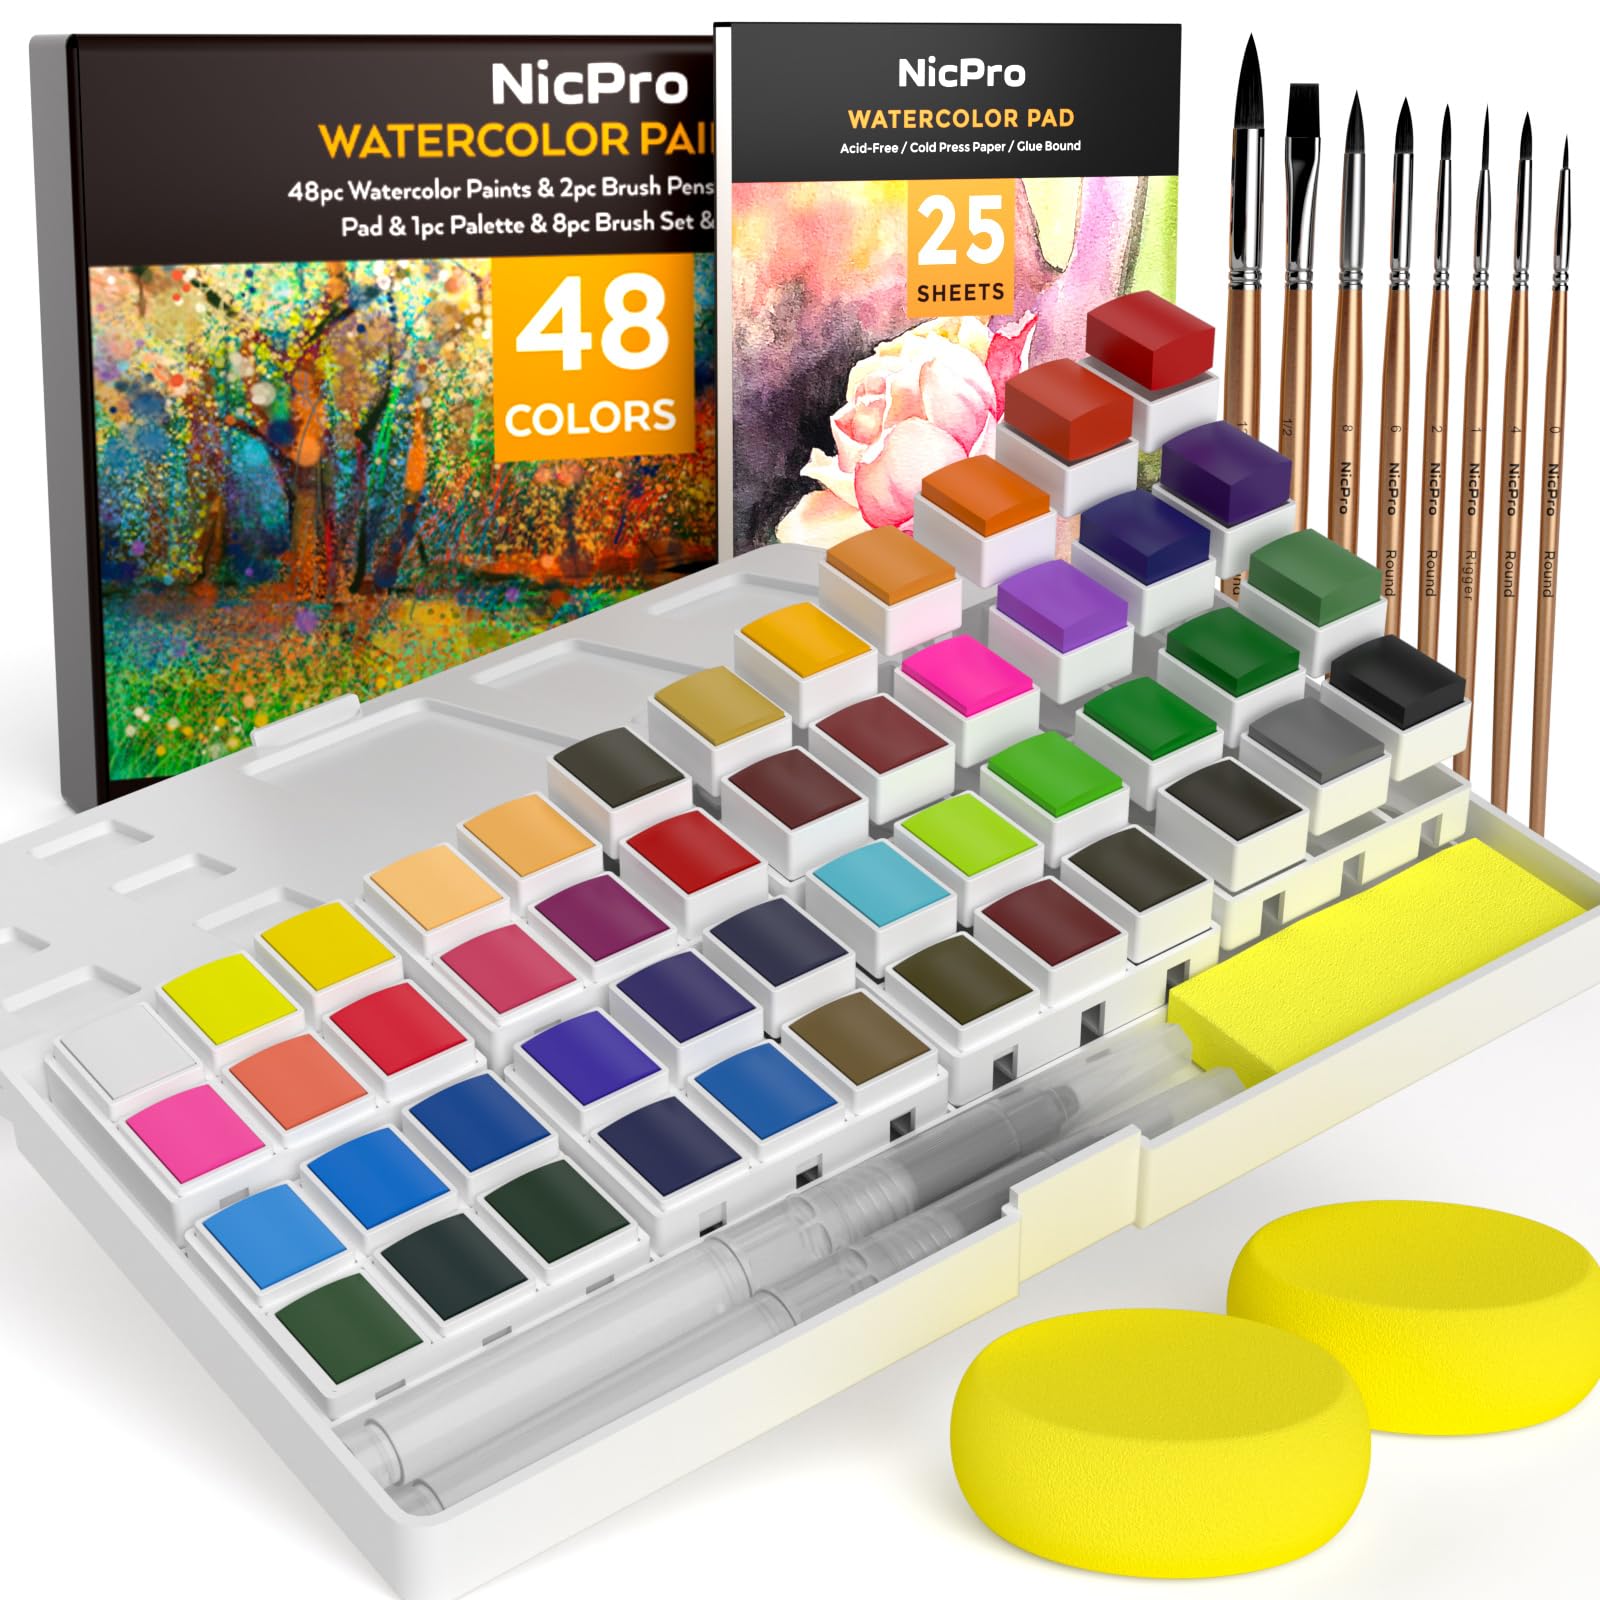 12pc Pottery Art Wool Brush Set for Ceramic Glaze/painting Coloring  Waterco*KW